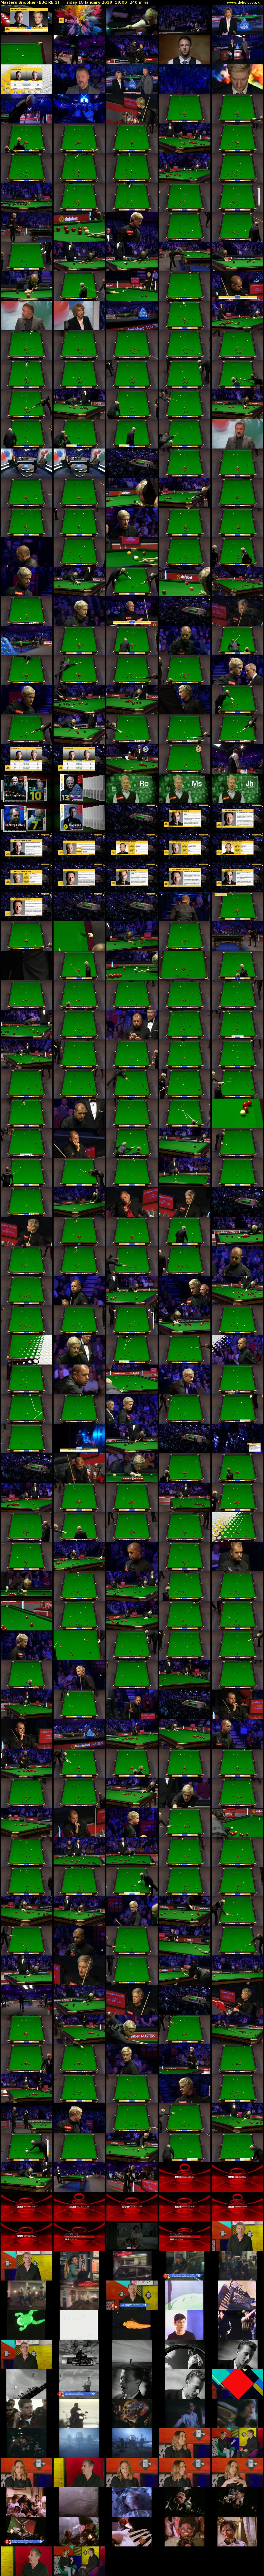 Masters Snooker (BBC RB 1) Friday 18 January 2019 19:00 - 23:00